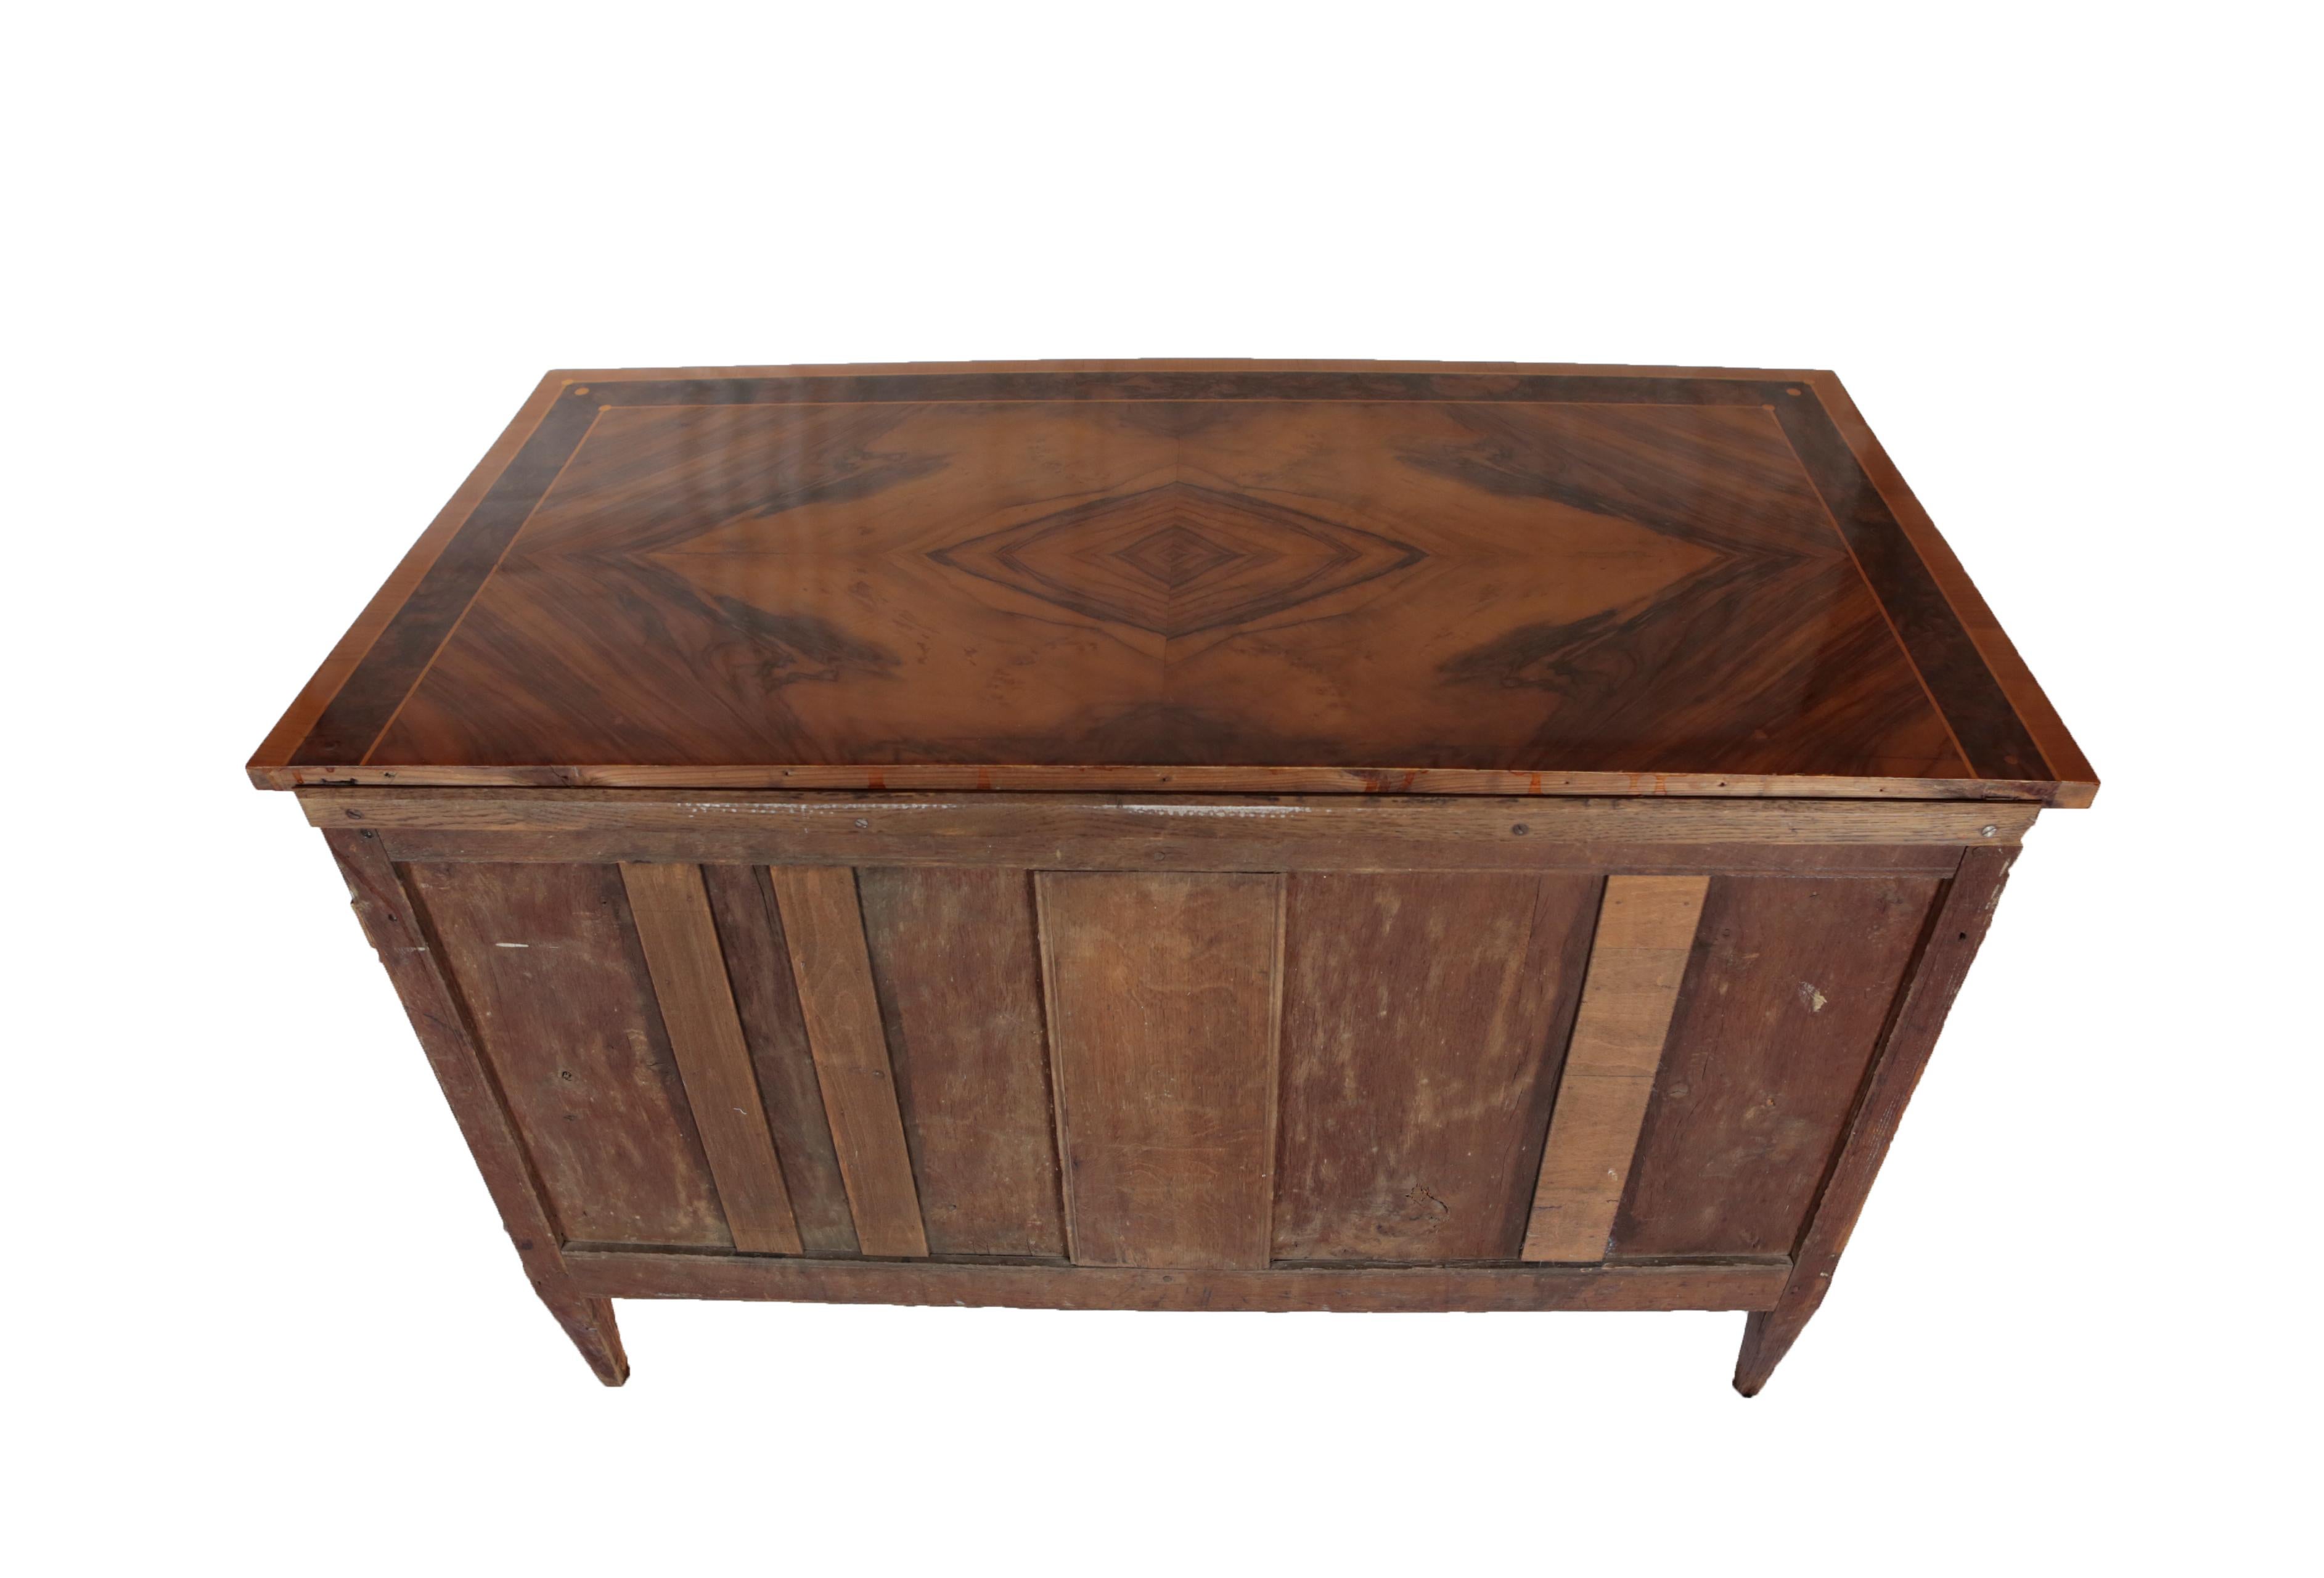 German Late 18th Century Louis Seize Chest of Drawers, circa 1780, Walnut and Nutroot